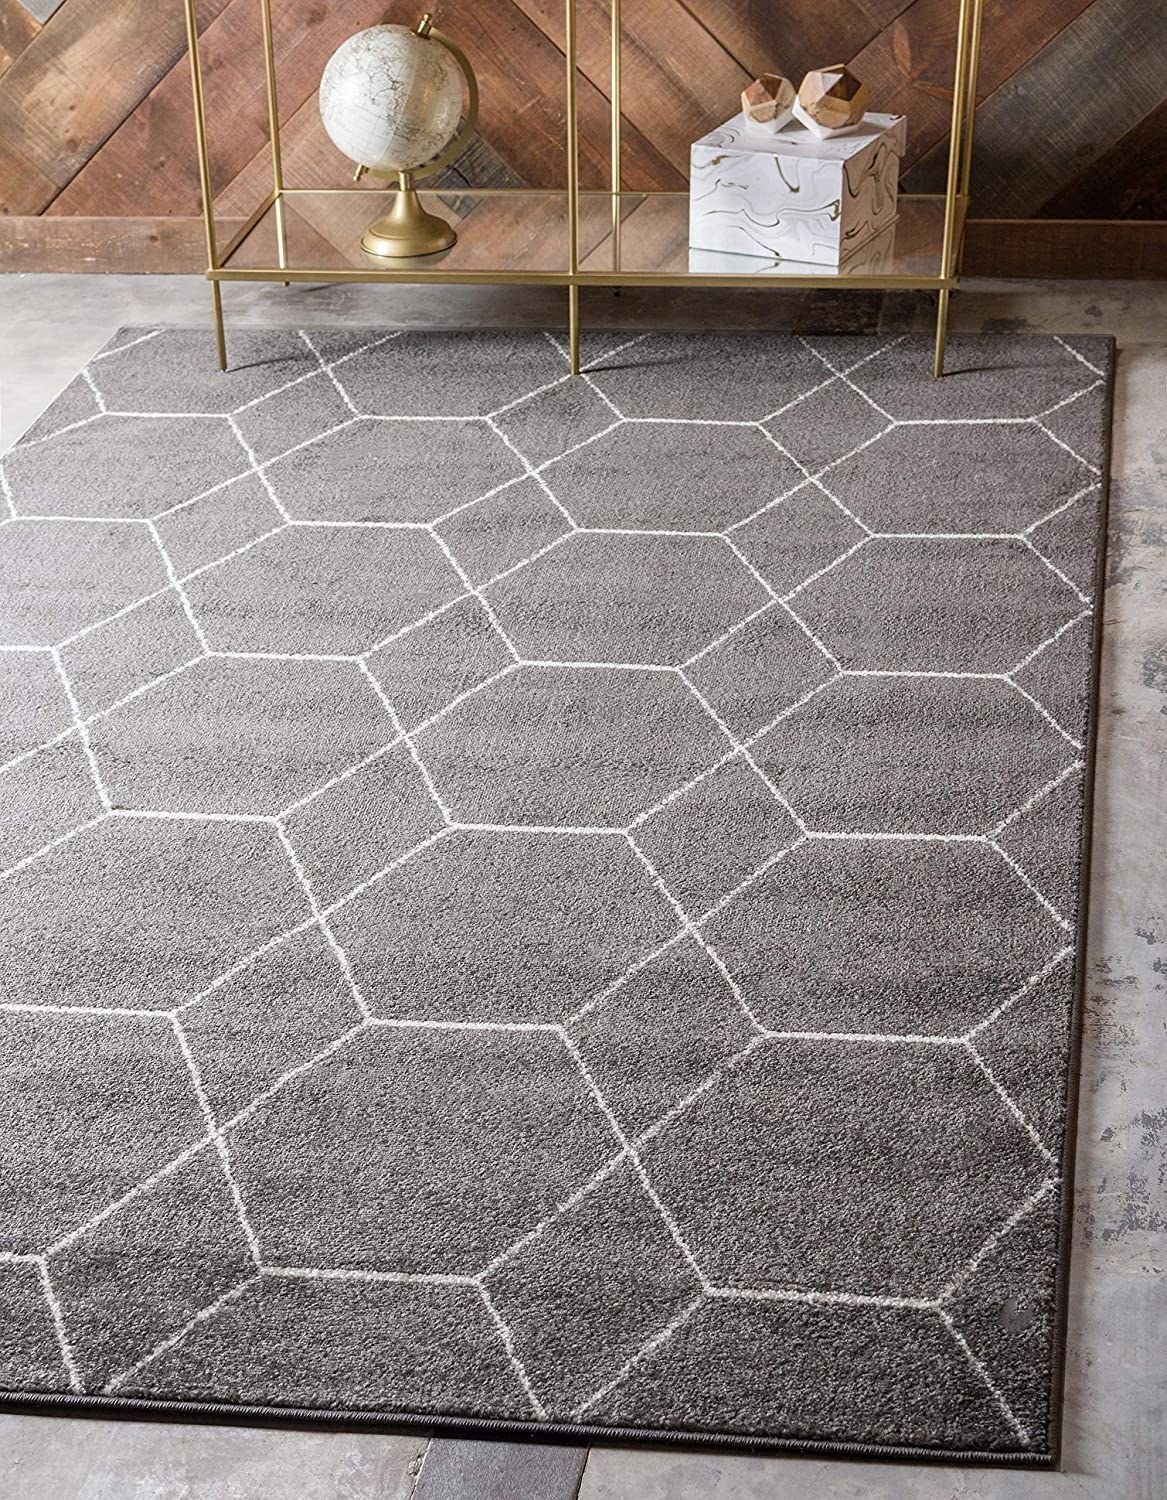 gray area rug with line pattern on it